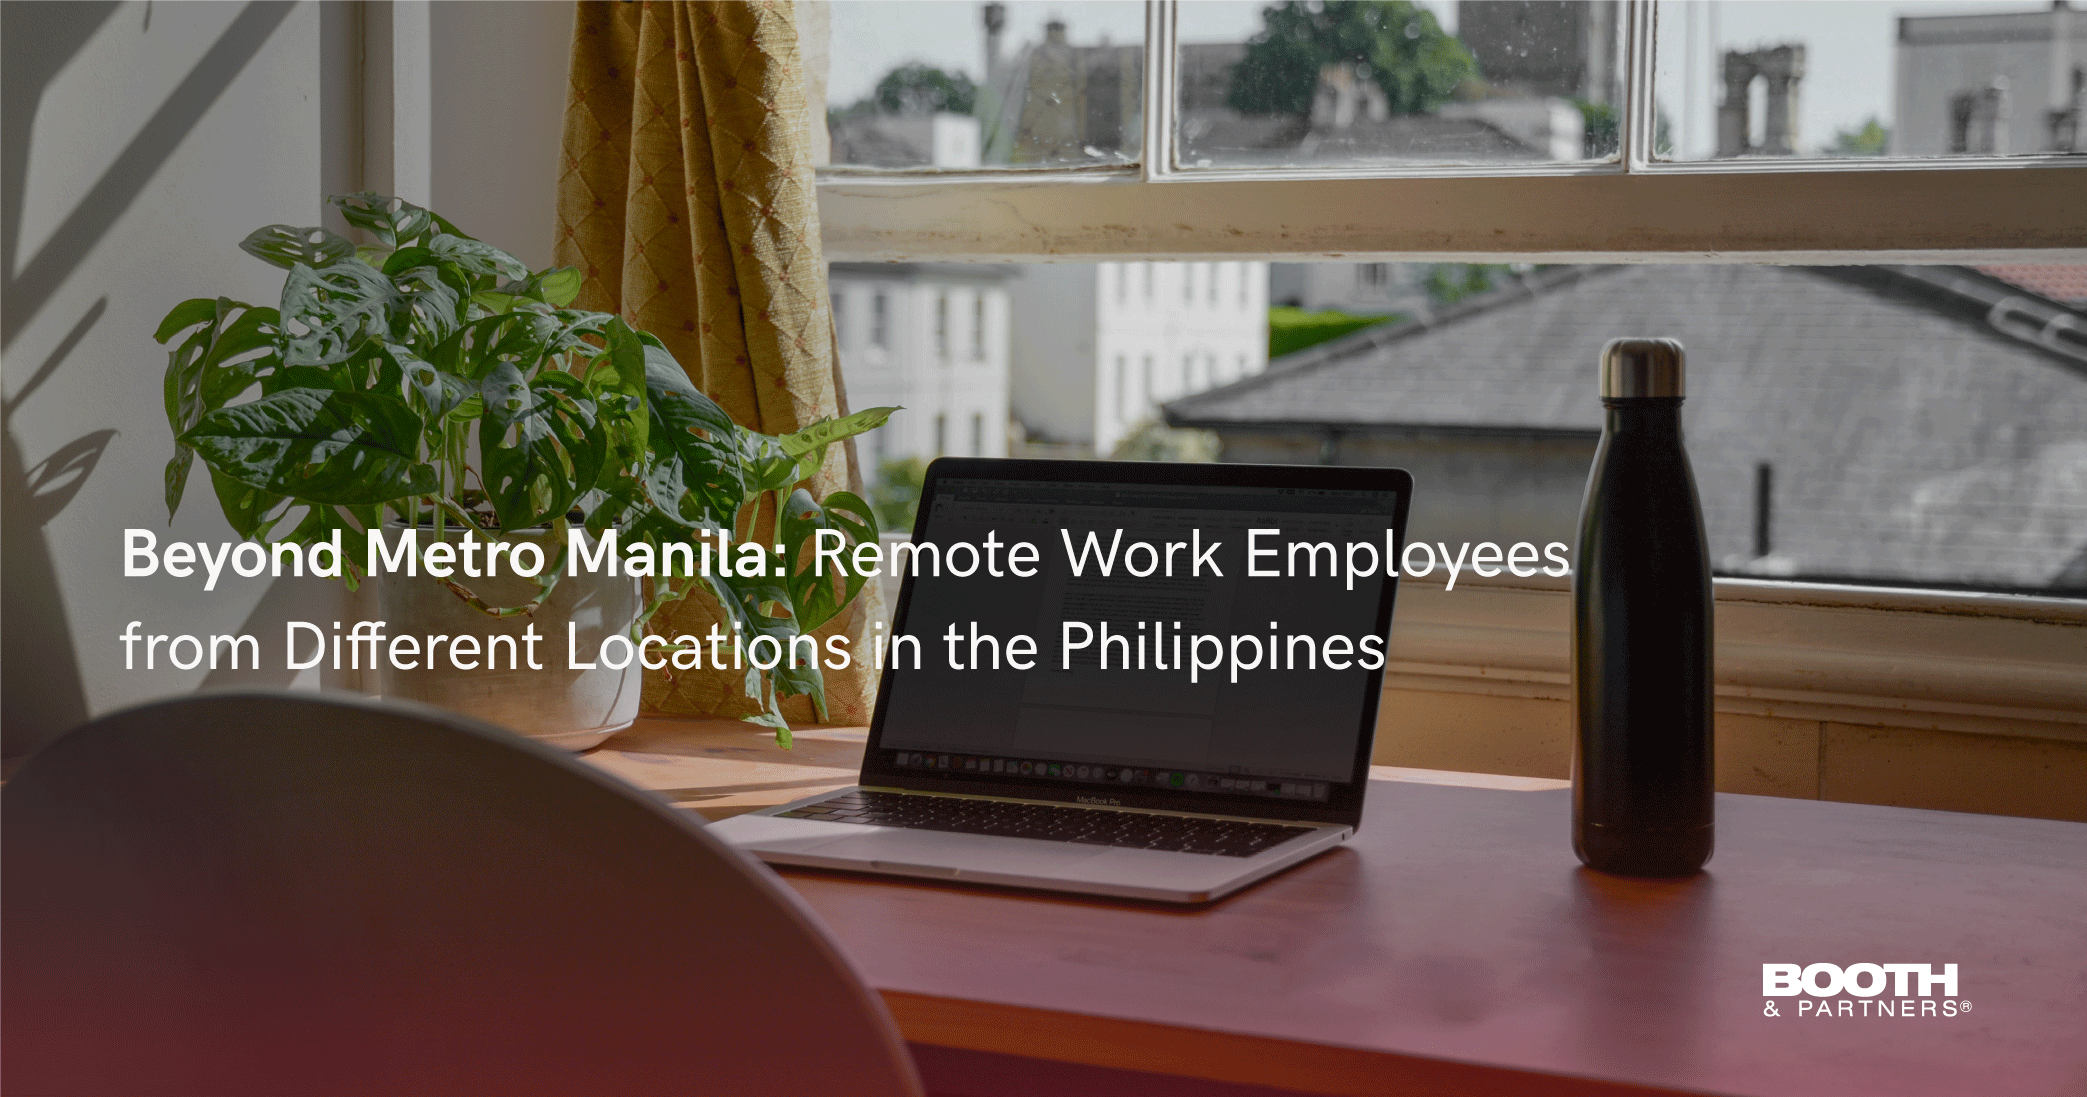 Beyond Metro Manila: Remote Work Employees from Different Locations in the Philippines